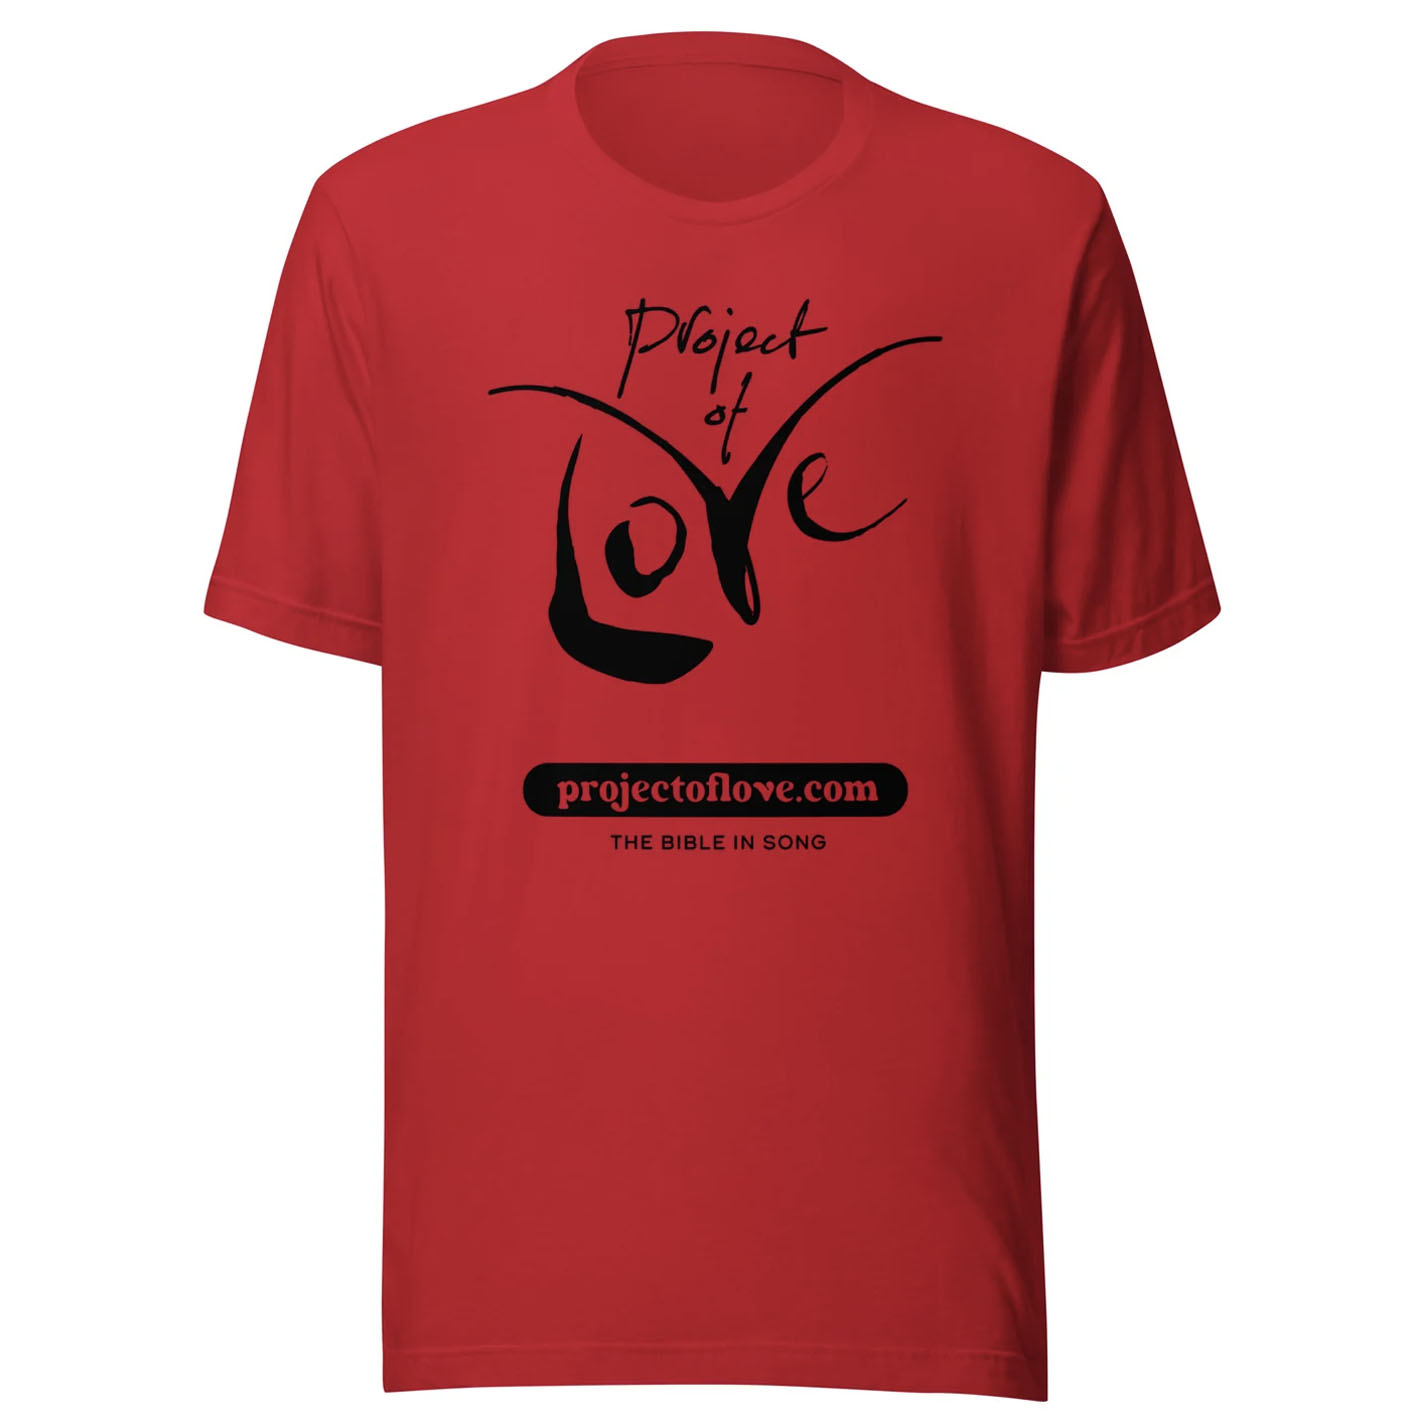 Project of Love t-shirt